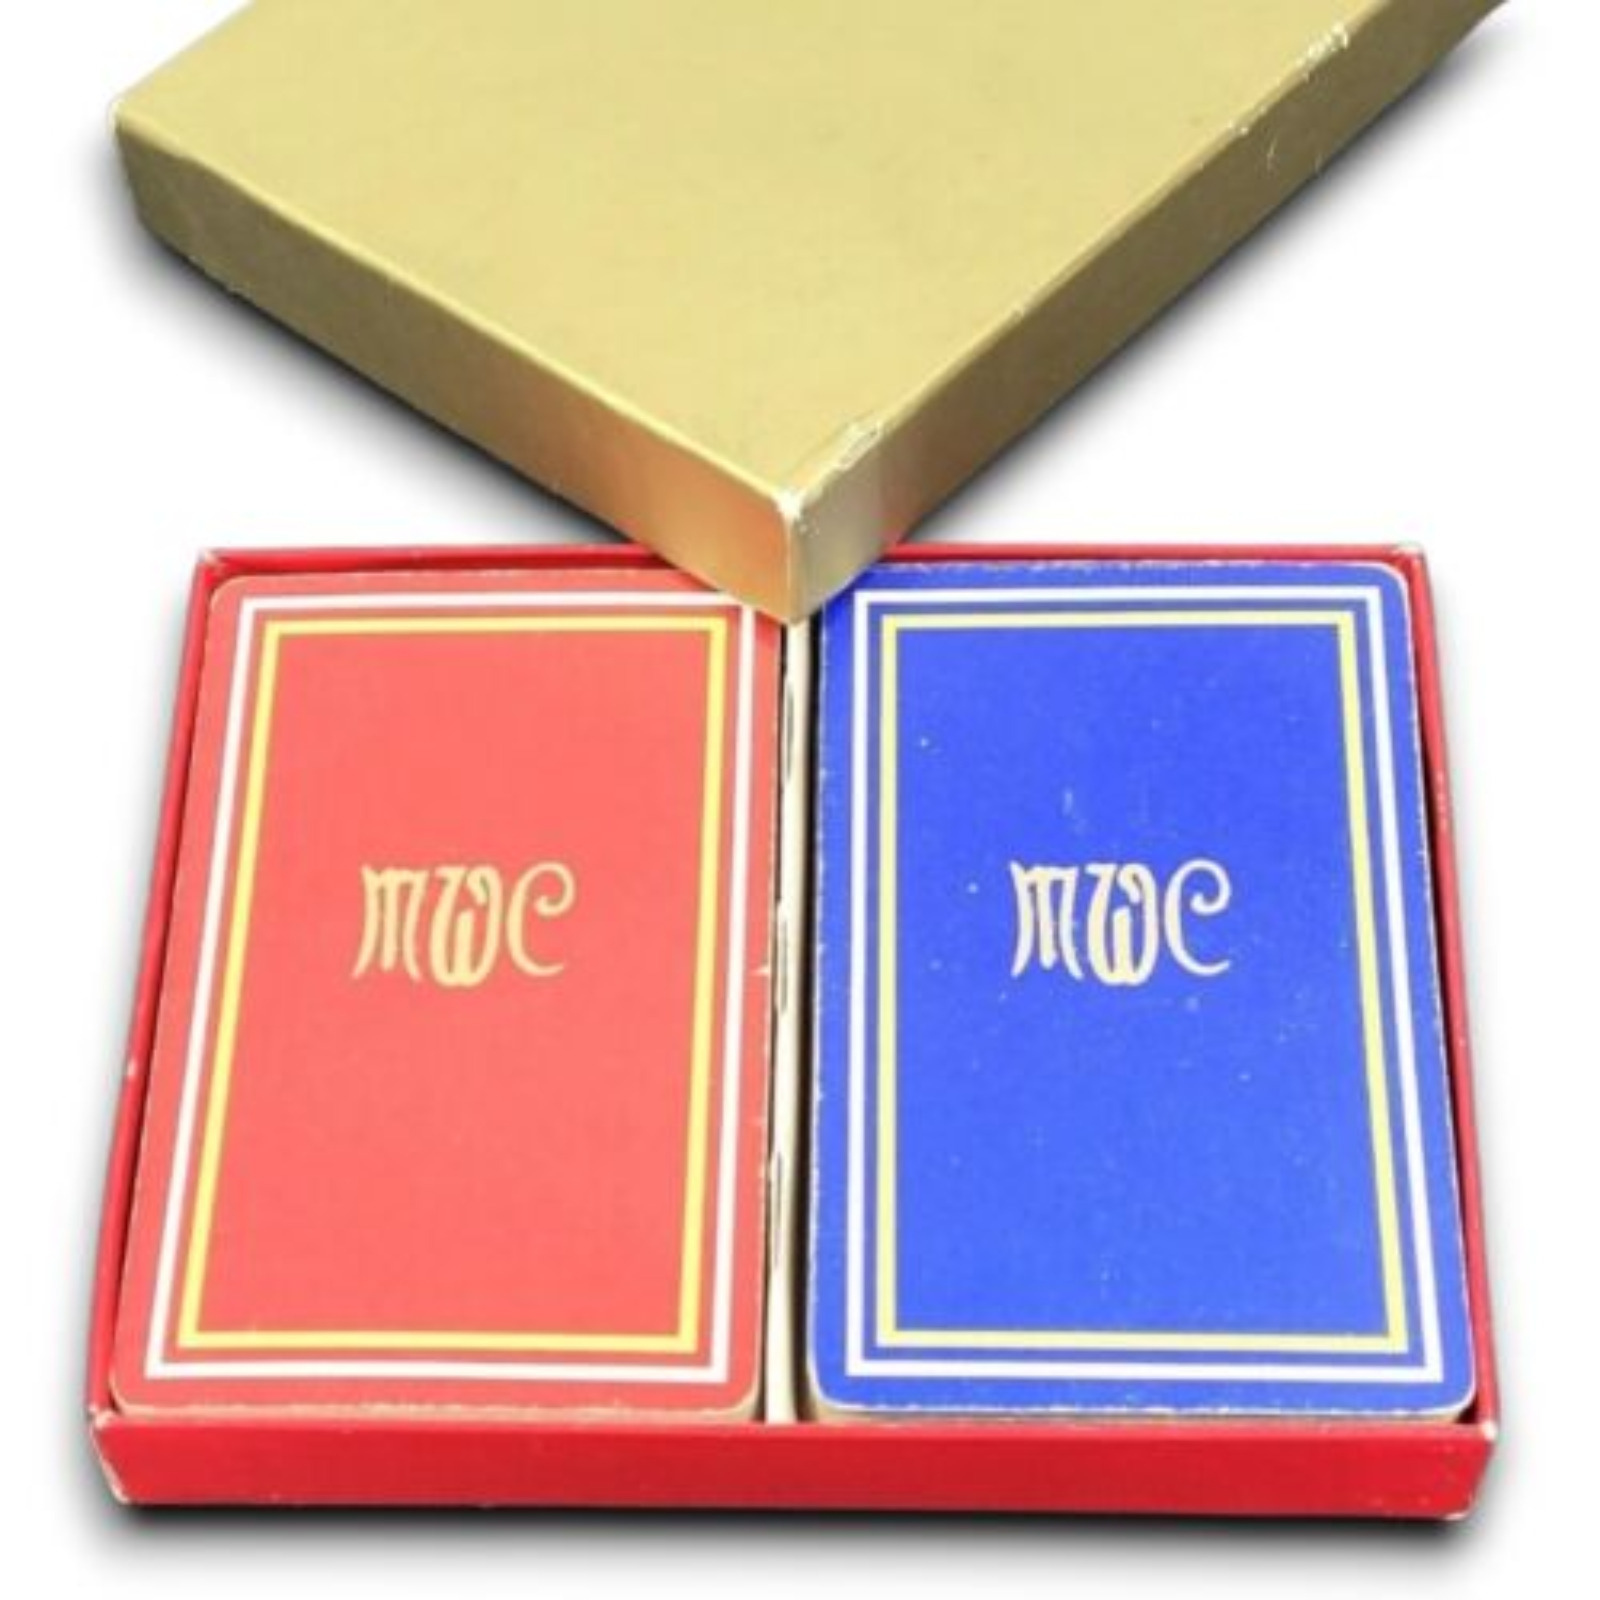 Vintage Gemaco Monogram Double Deck Playing Cards Initials MWC Gold Trim Box Set